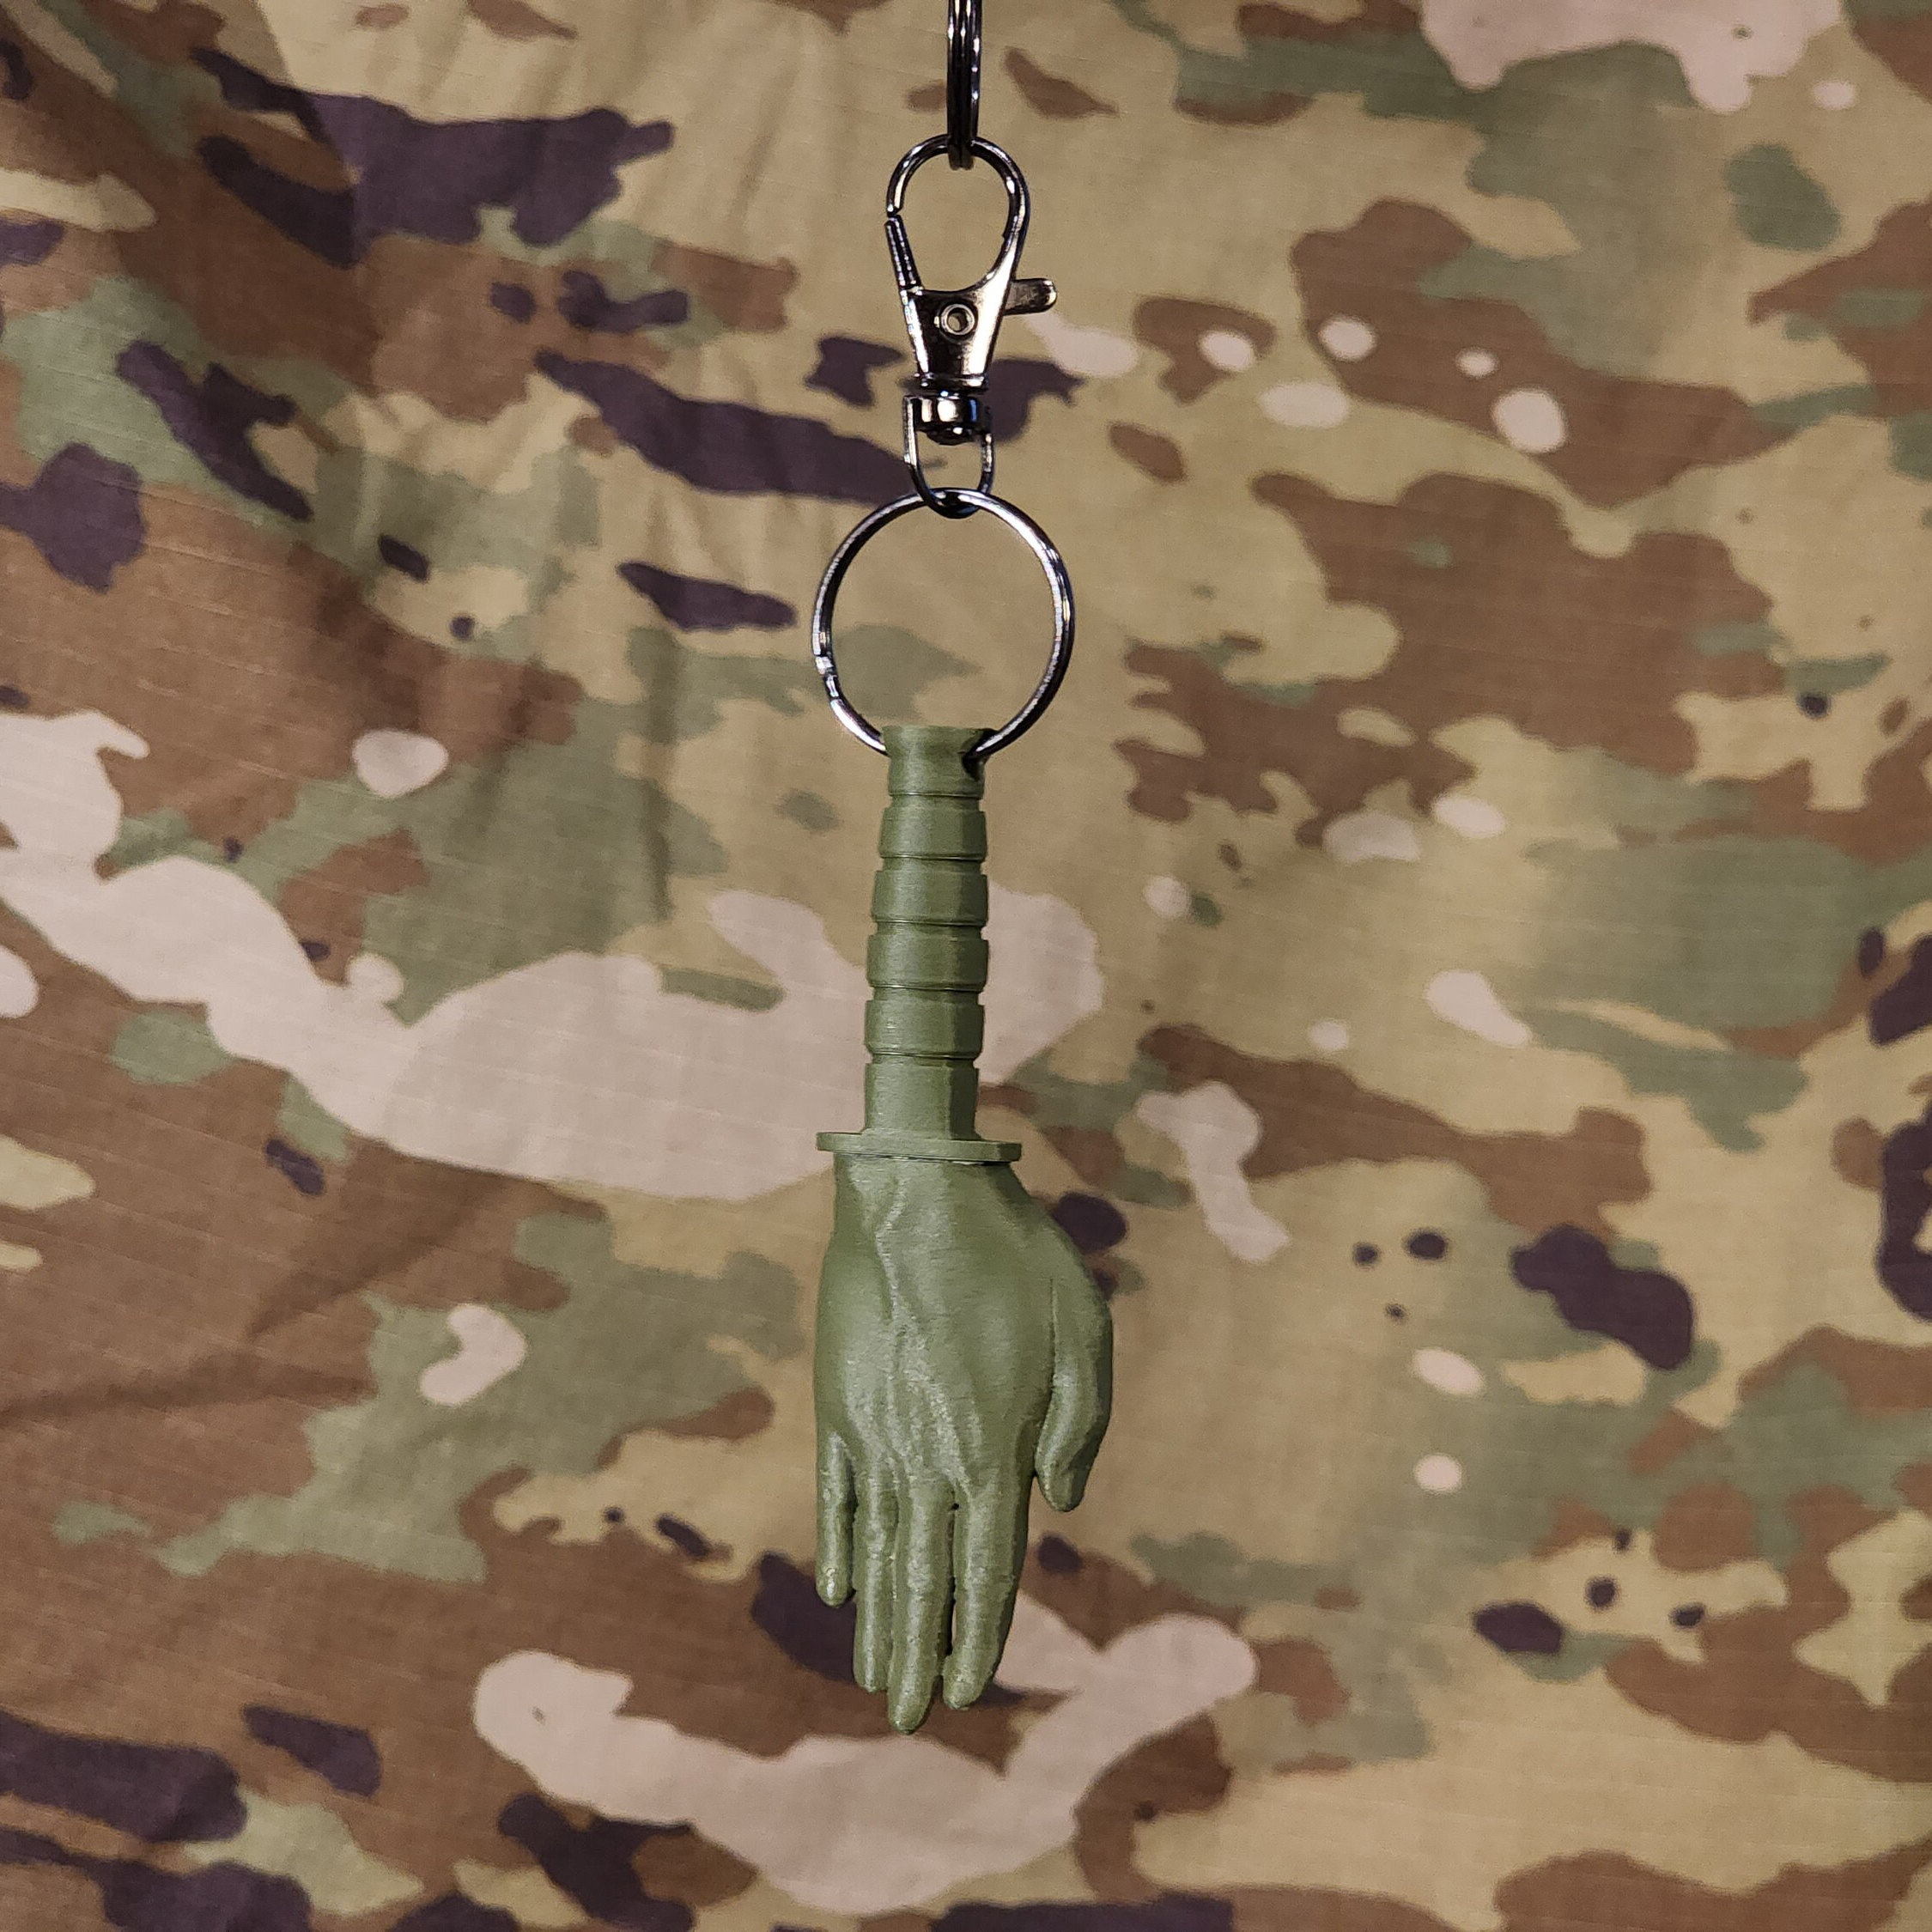 Knife Hand Keychain - Great Military gift for Army, Marines, Navy, Airforce